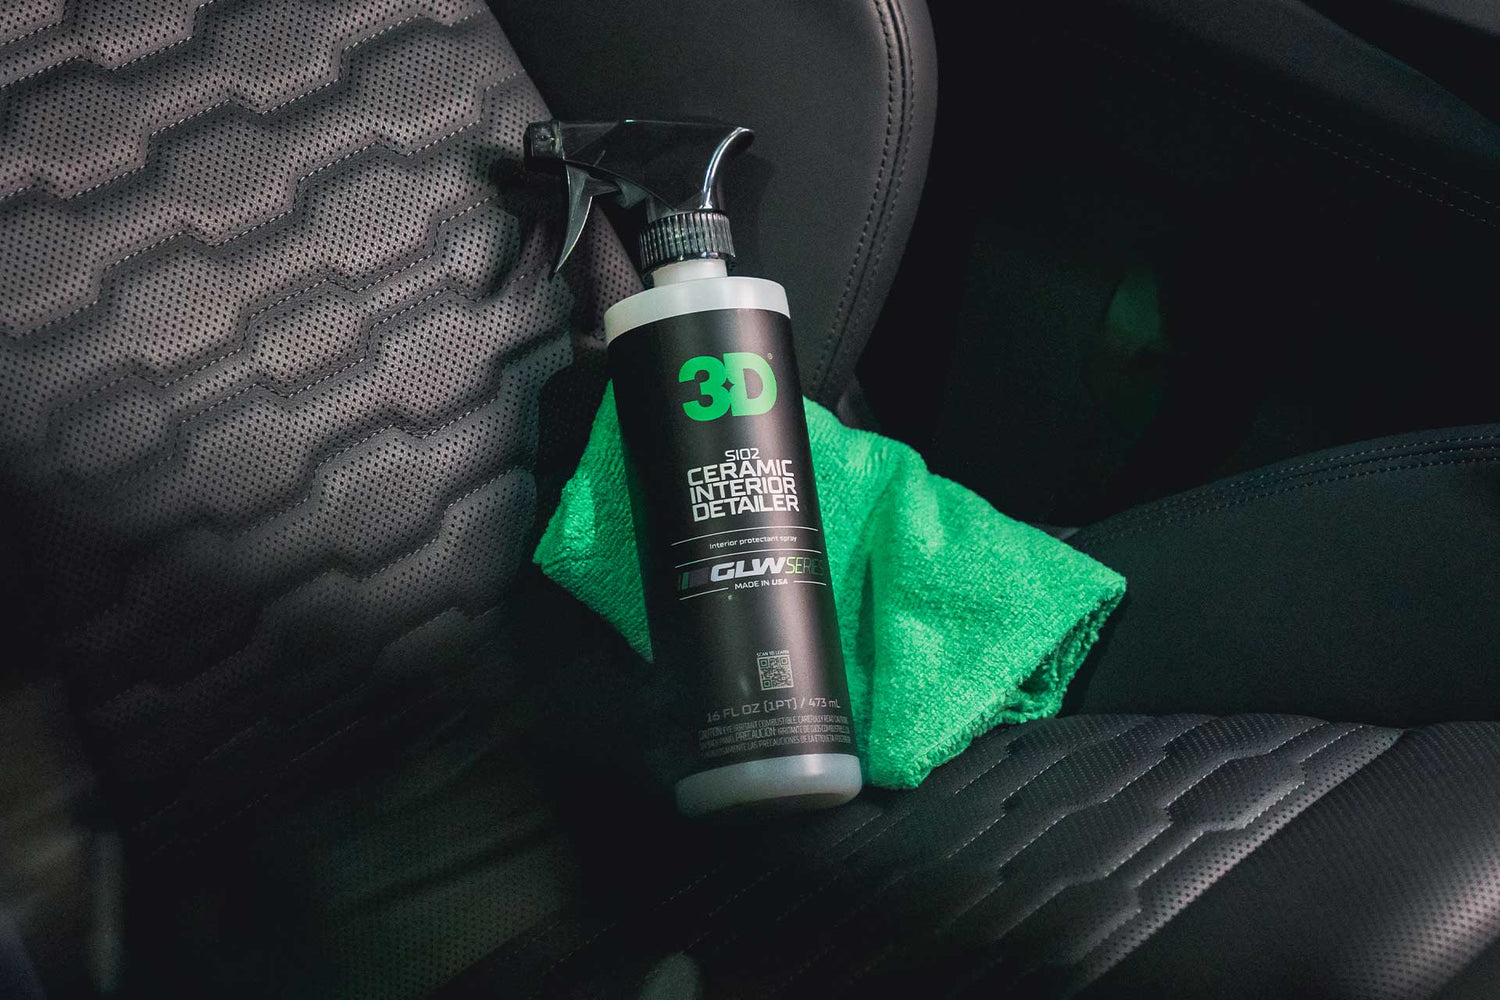 bottle of ceramic interior detailer and green microfiber towle on car seat